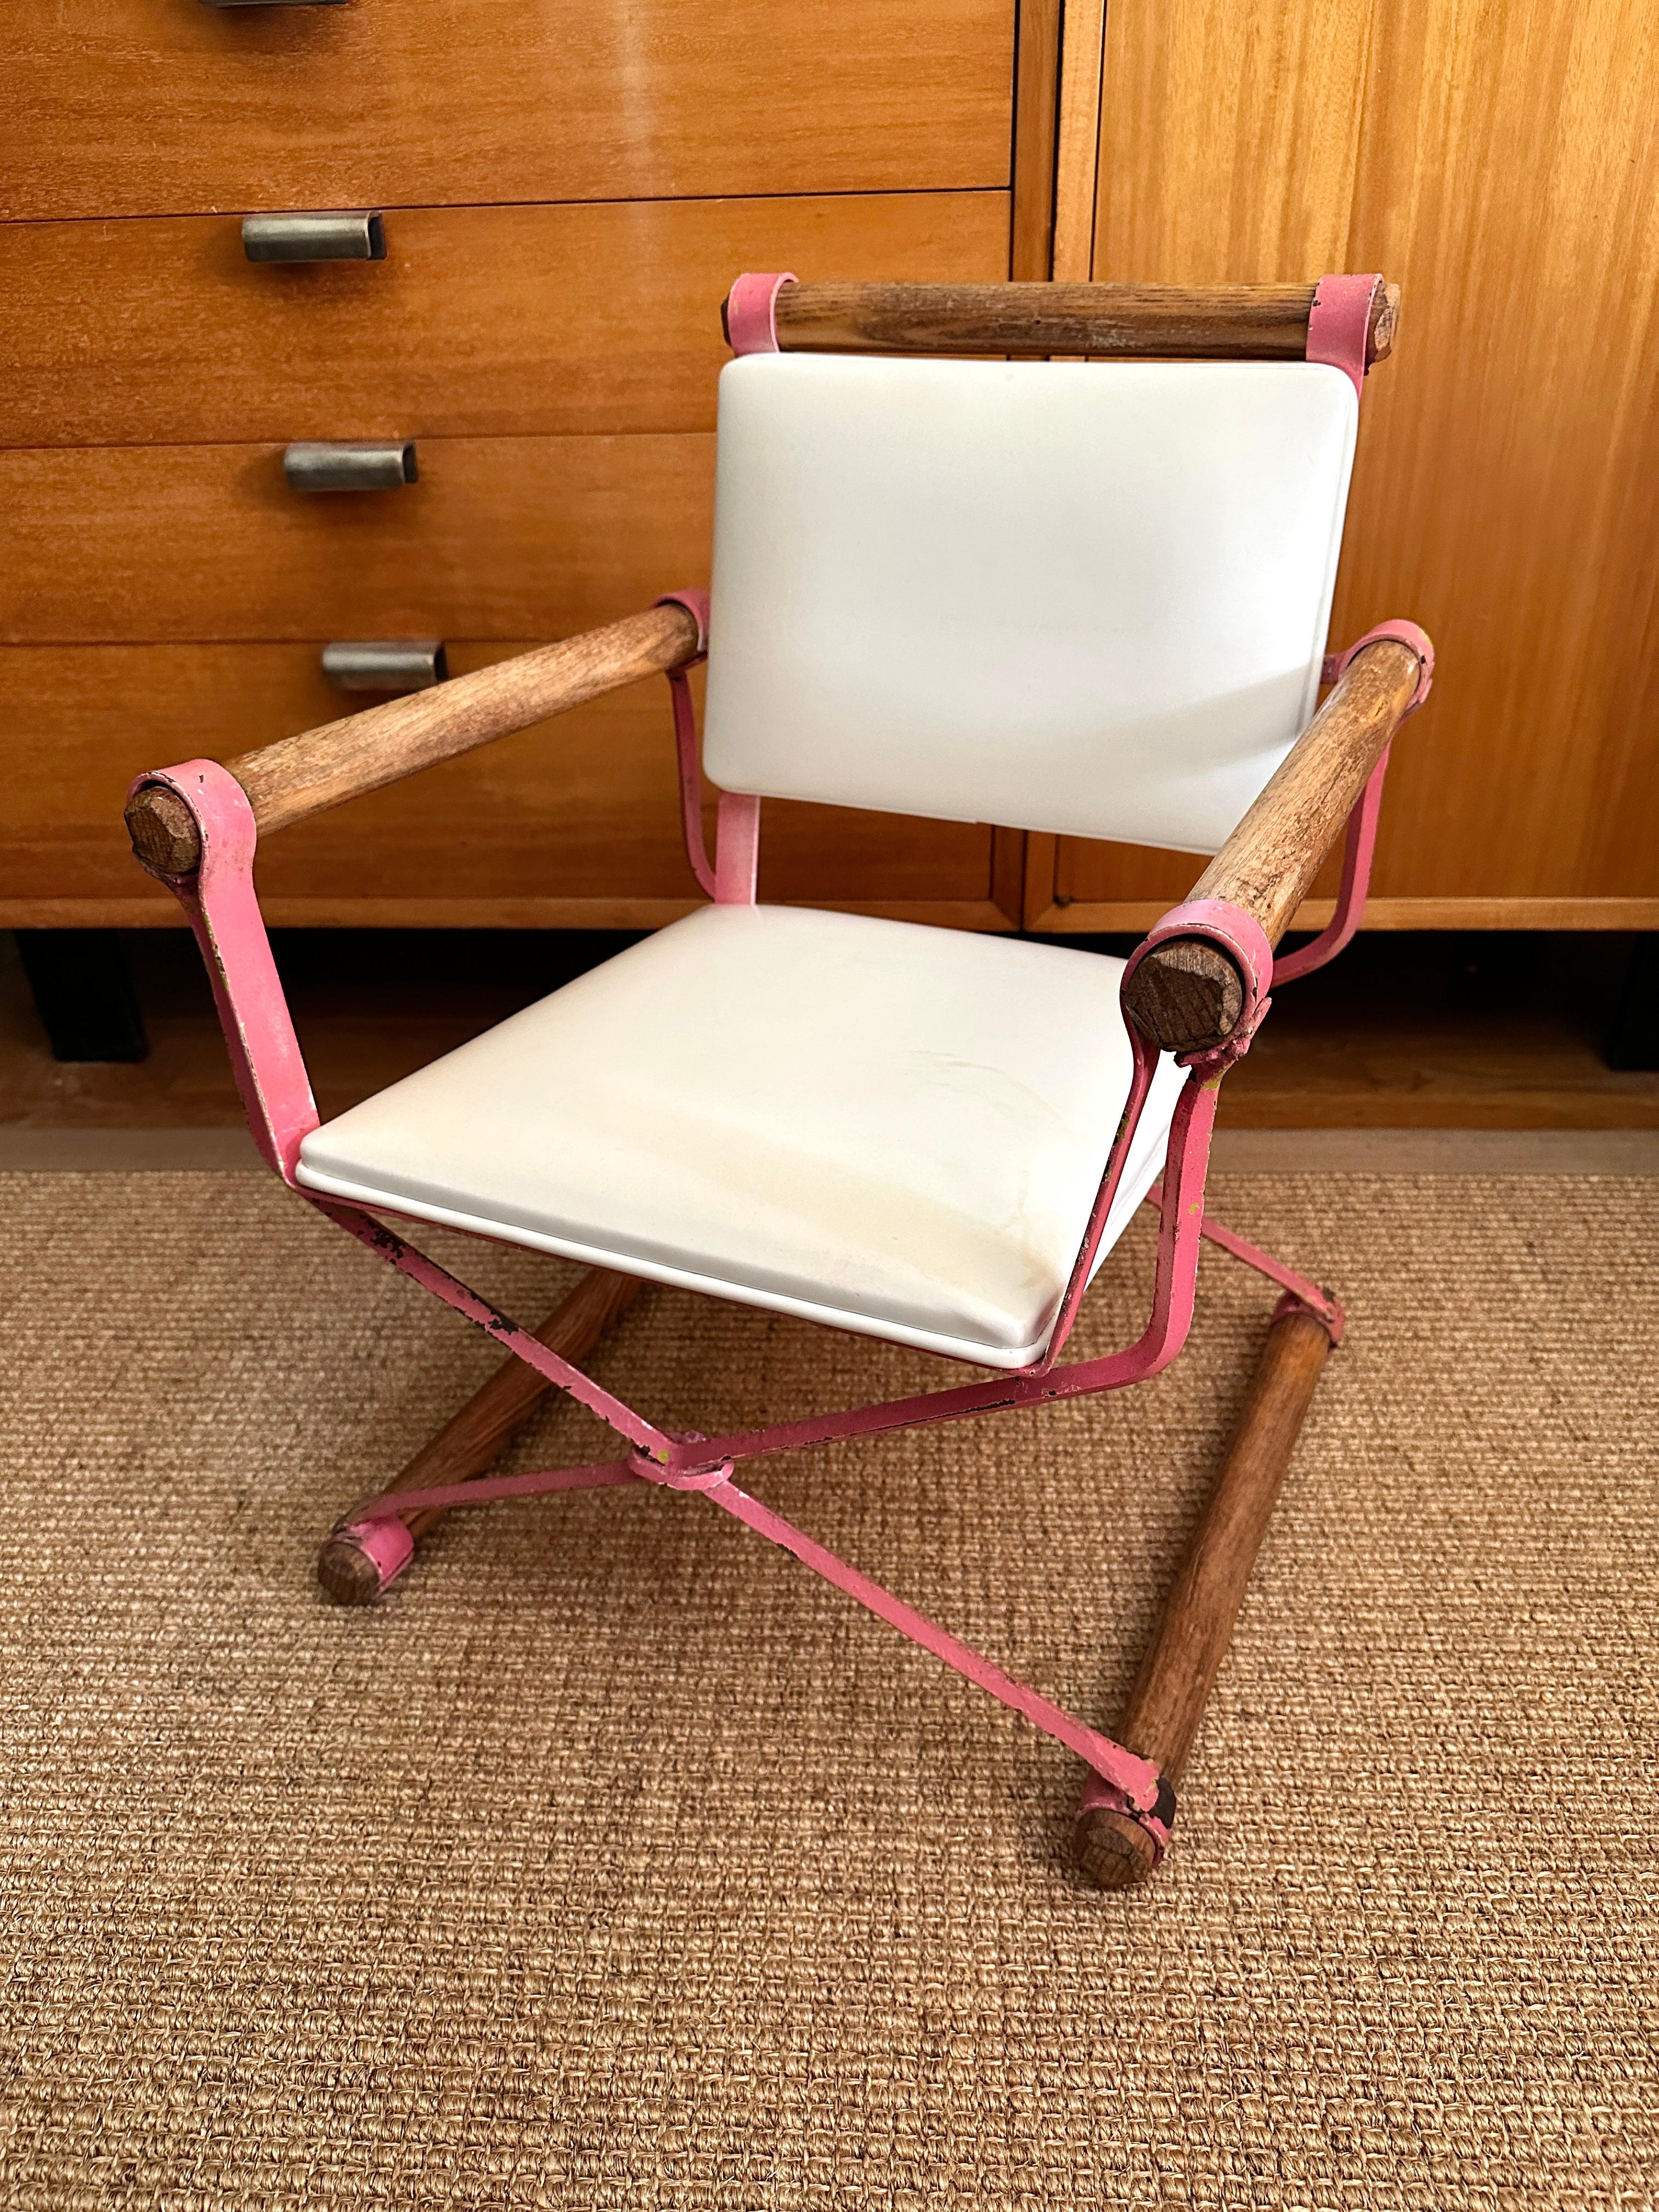 A diminutive childs chair designed by Cleo Baldon for her own Terra furniture company. Cleo Baldon began her career by designing swimming pools for homes throughtout southern California. She later branched out and opened her own furniture company,